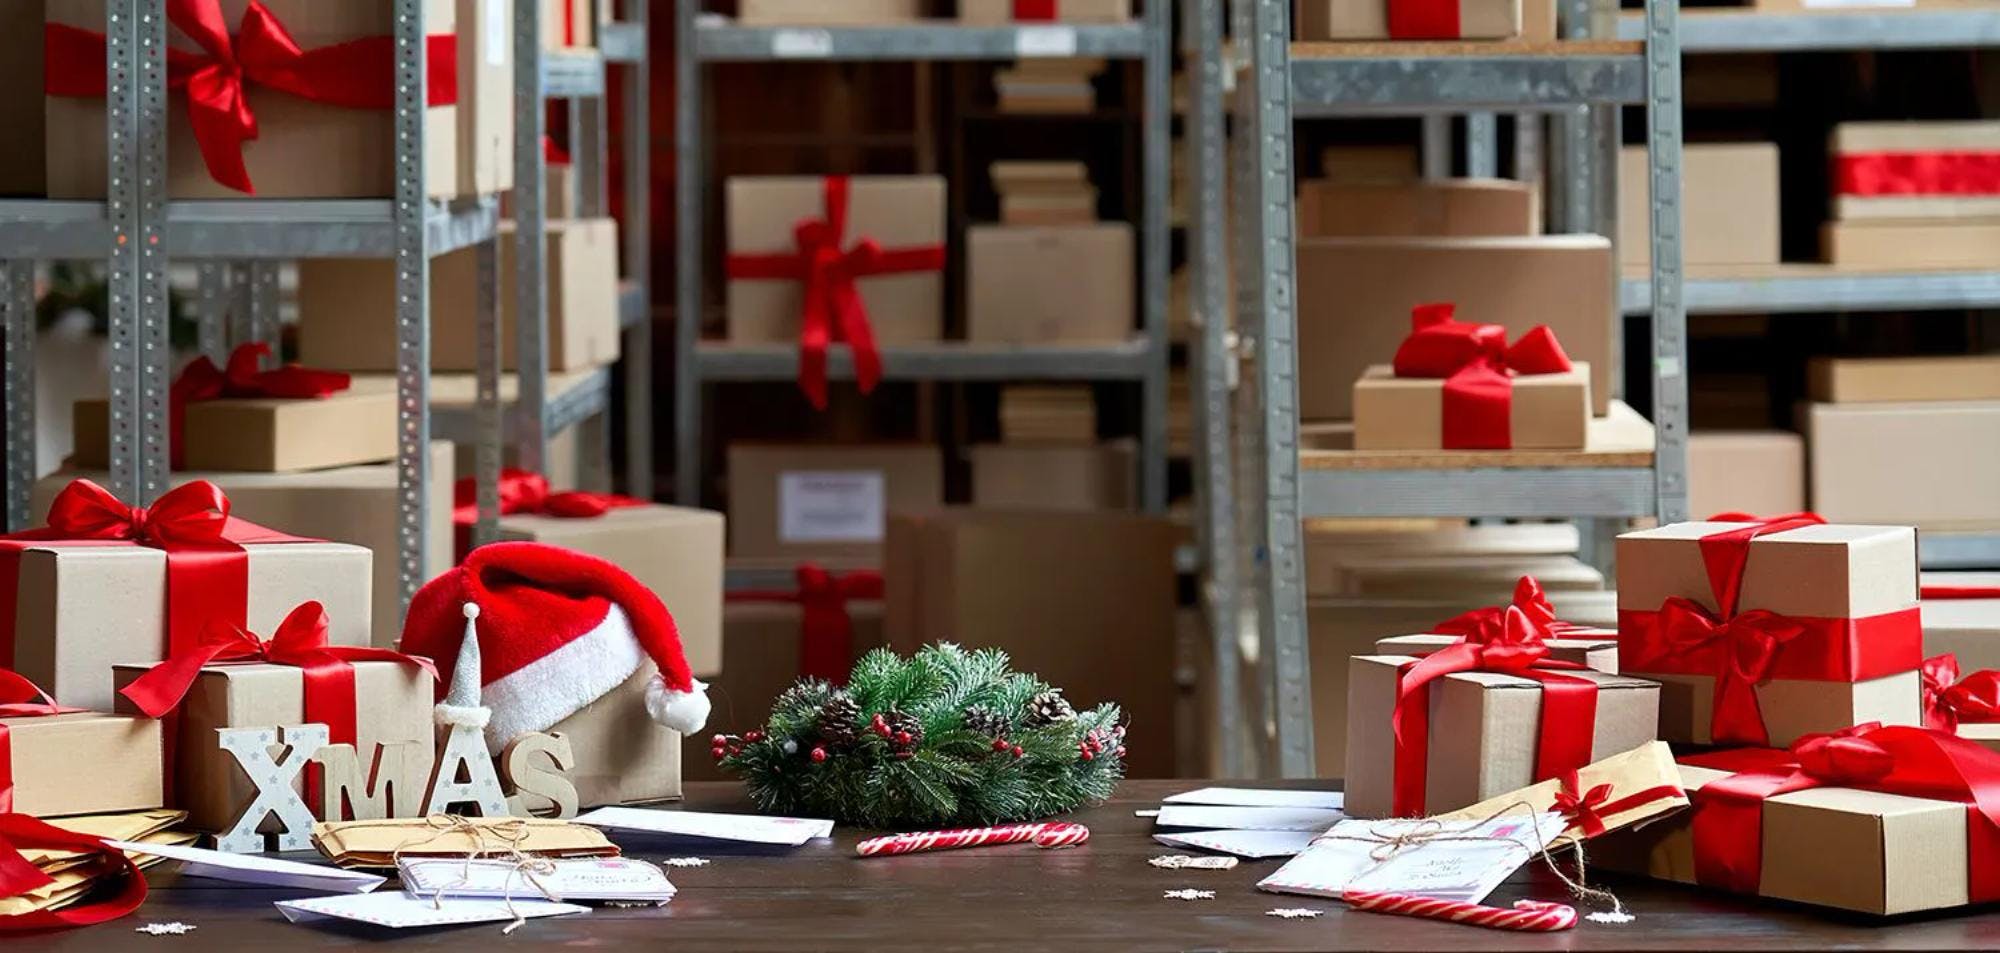 2022 Holiday shipping deadlines